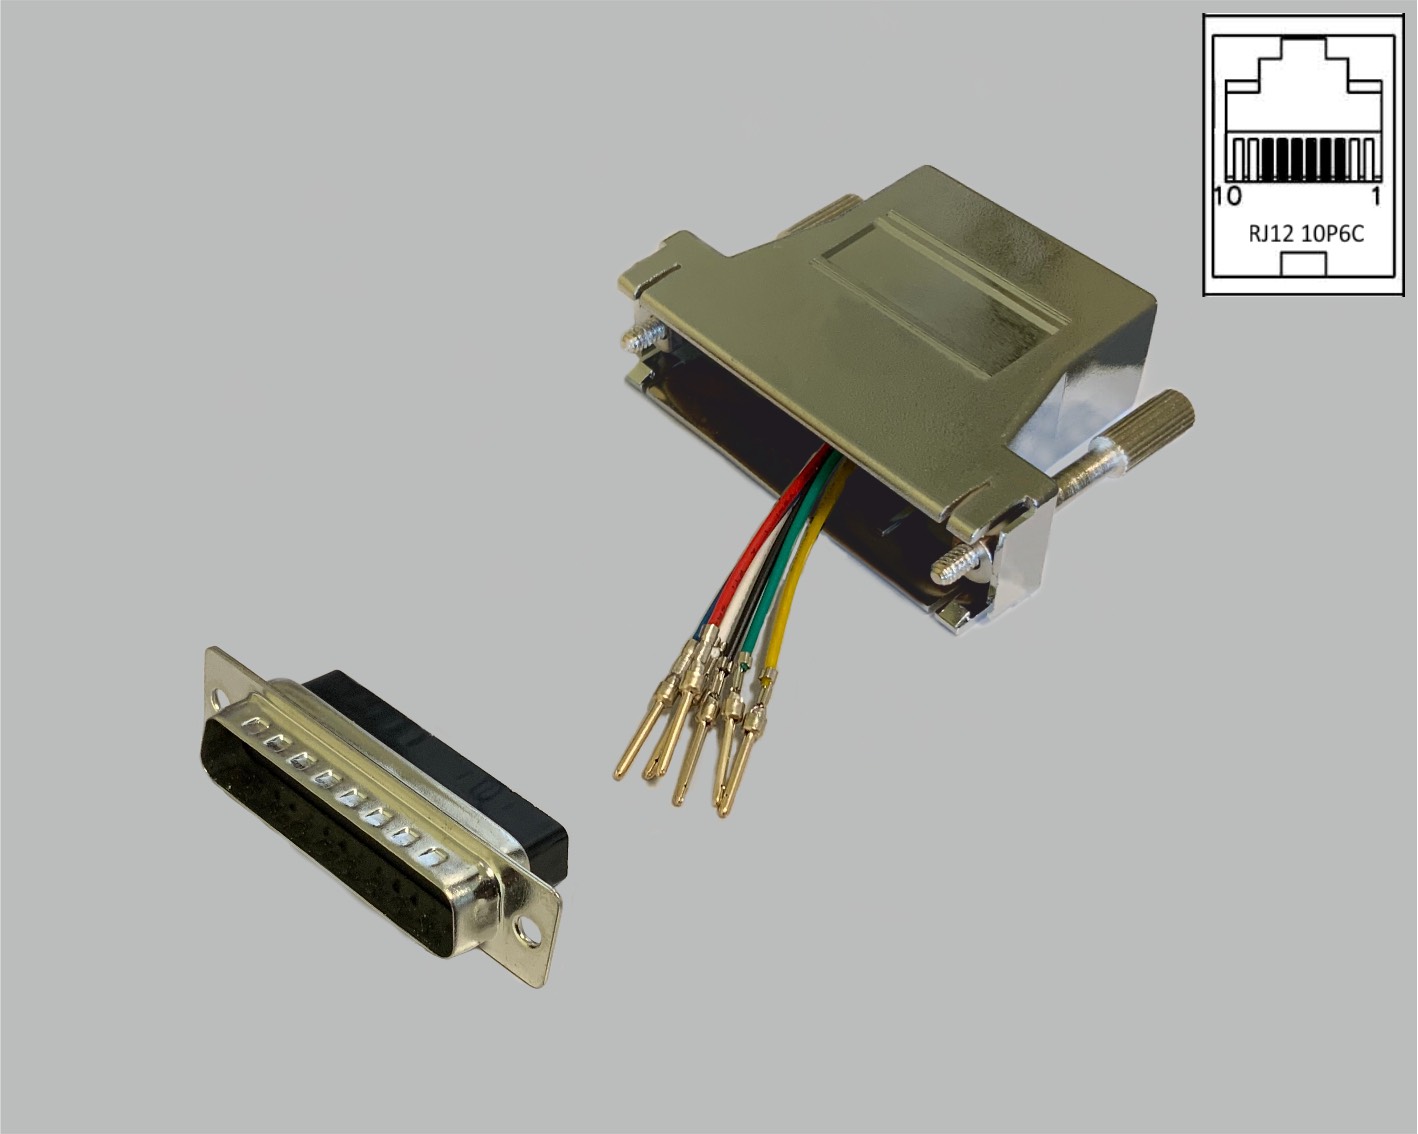 D-Sub/RJ adapter, freely configurable, D-Sub male connector 25-pin to RJ12 (10P6C) female connector, metallised